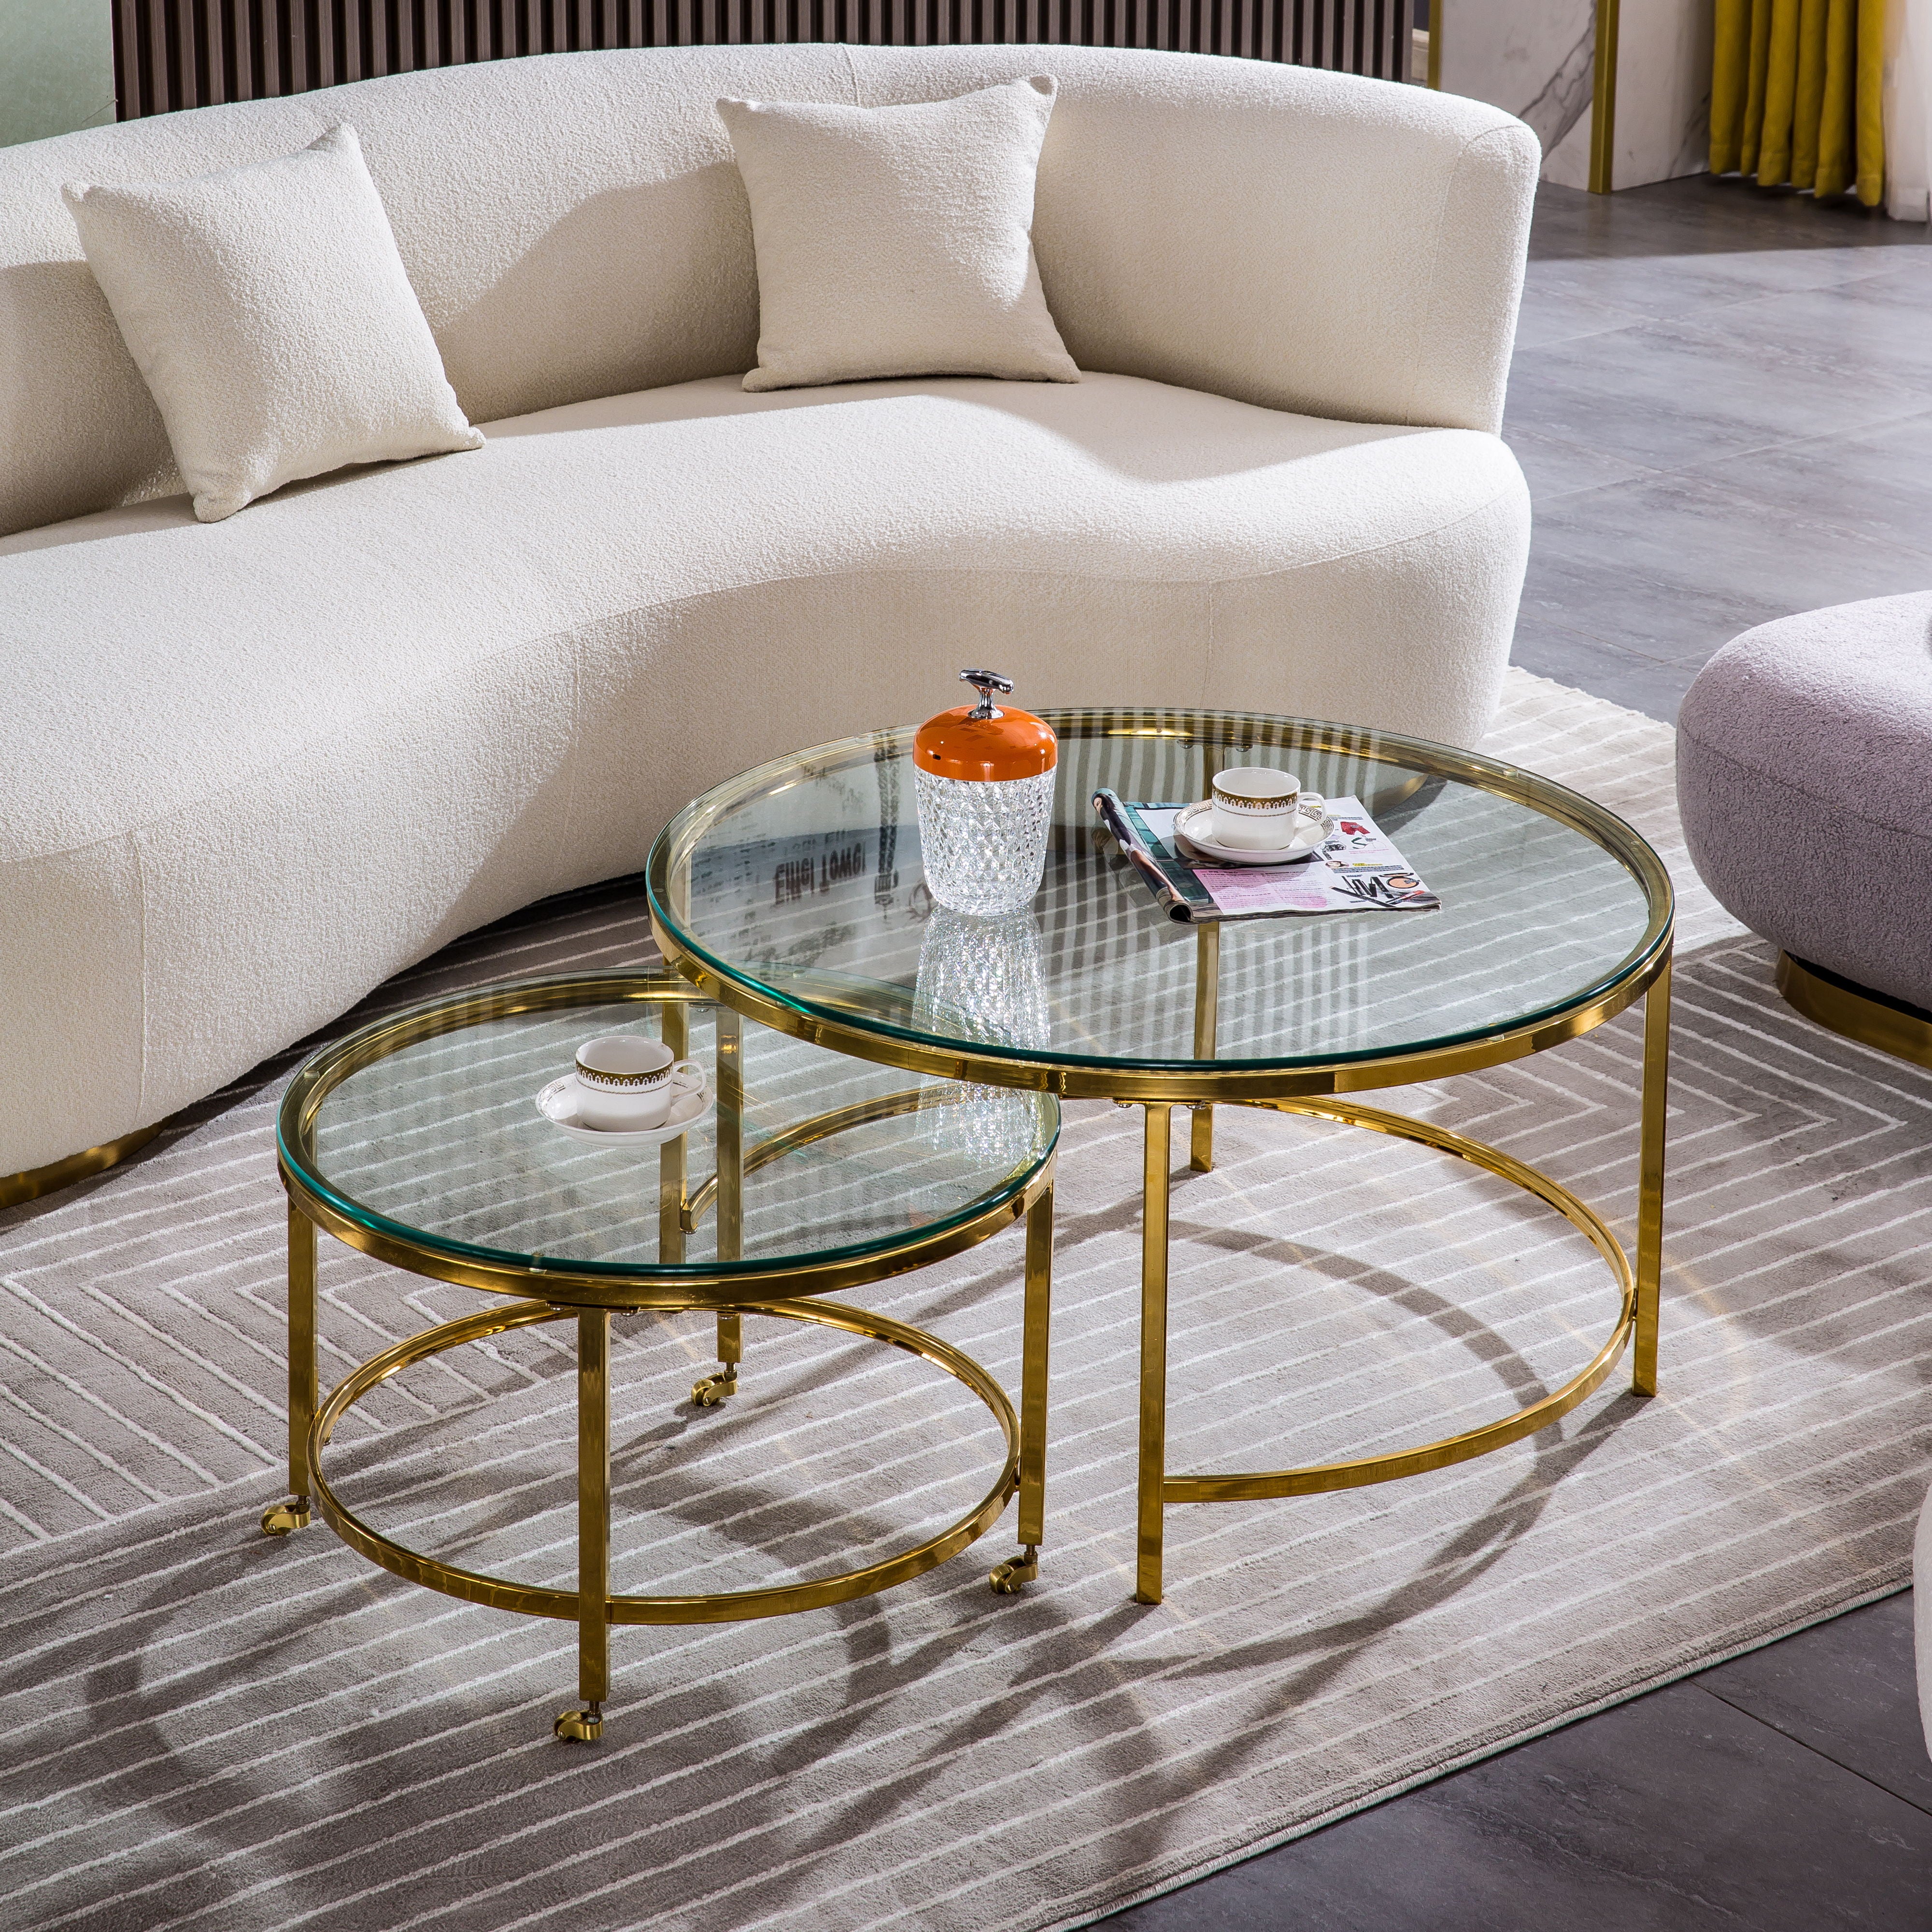 Modern Nesting 10Mm / 0.39" Clear Tempered Glass Coffee Table (Set of 2), Round End Table With Gold Finish Metal Base For Living Room